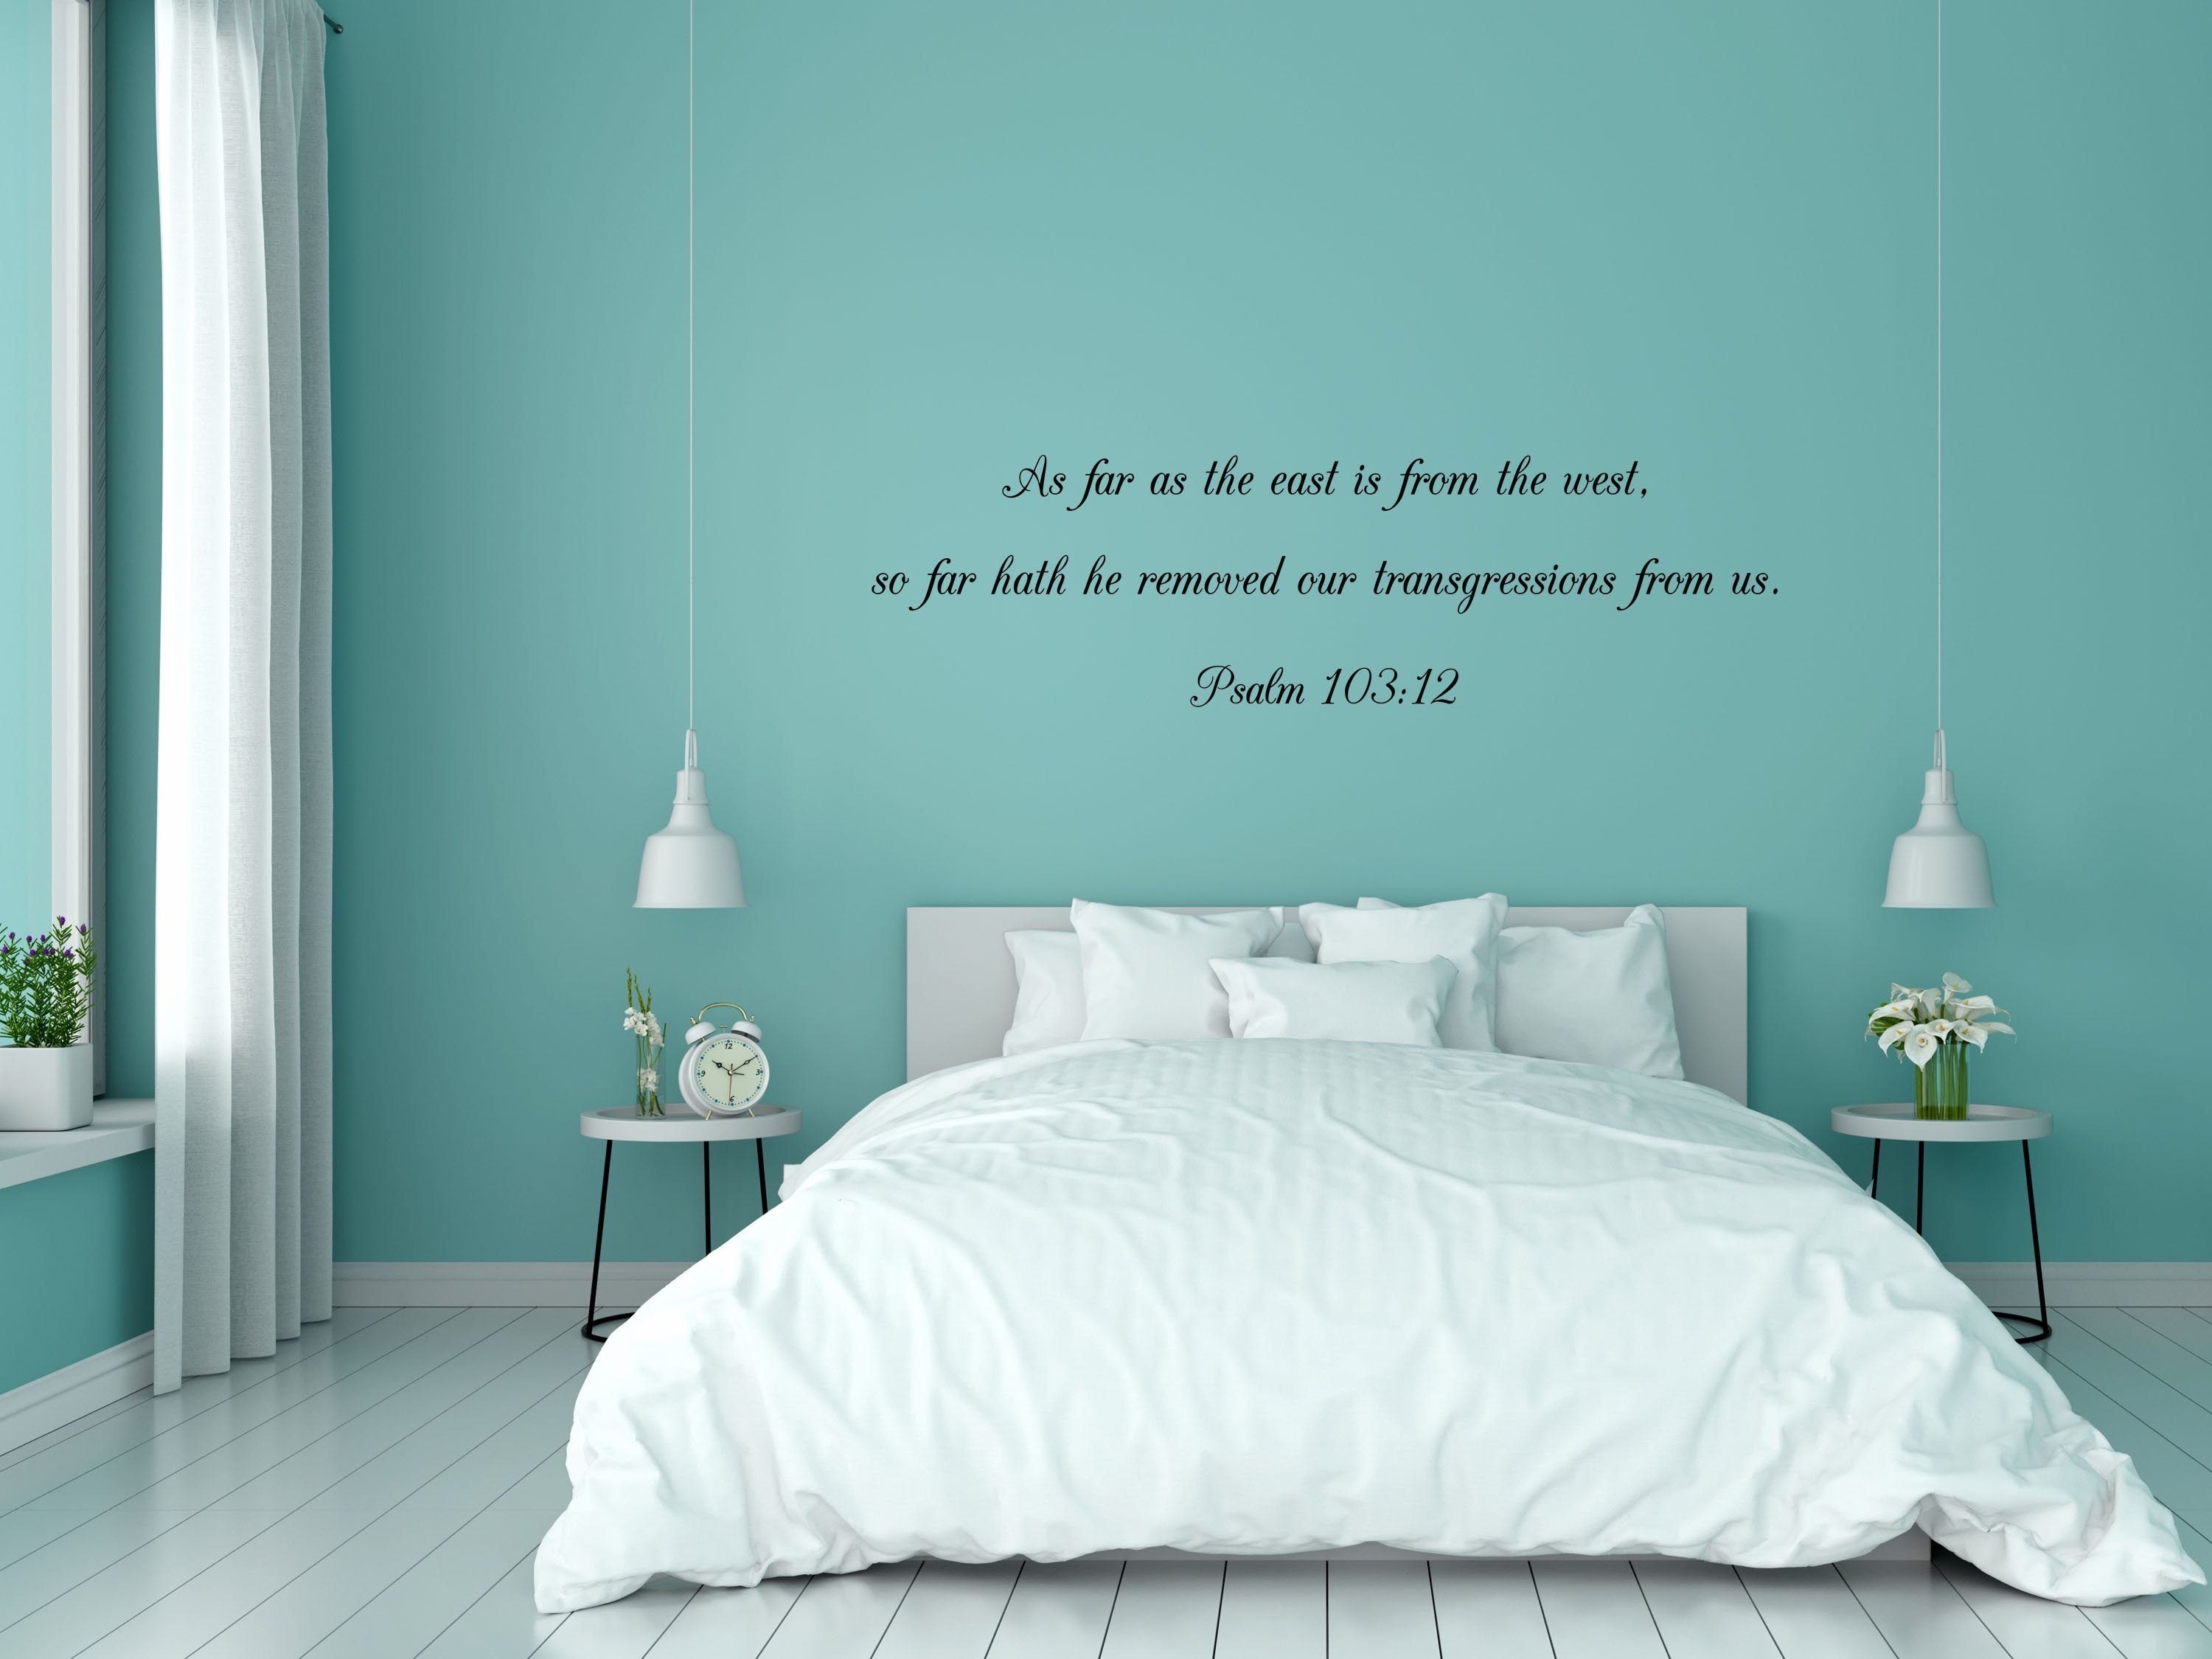 Wall Decal Psalm 103:3 He Forgives All My Sins and Heals All